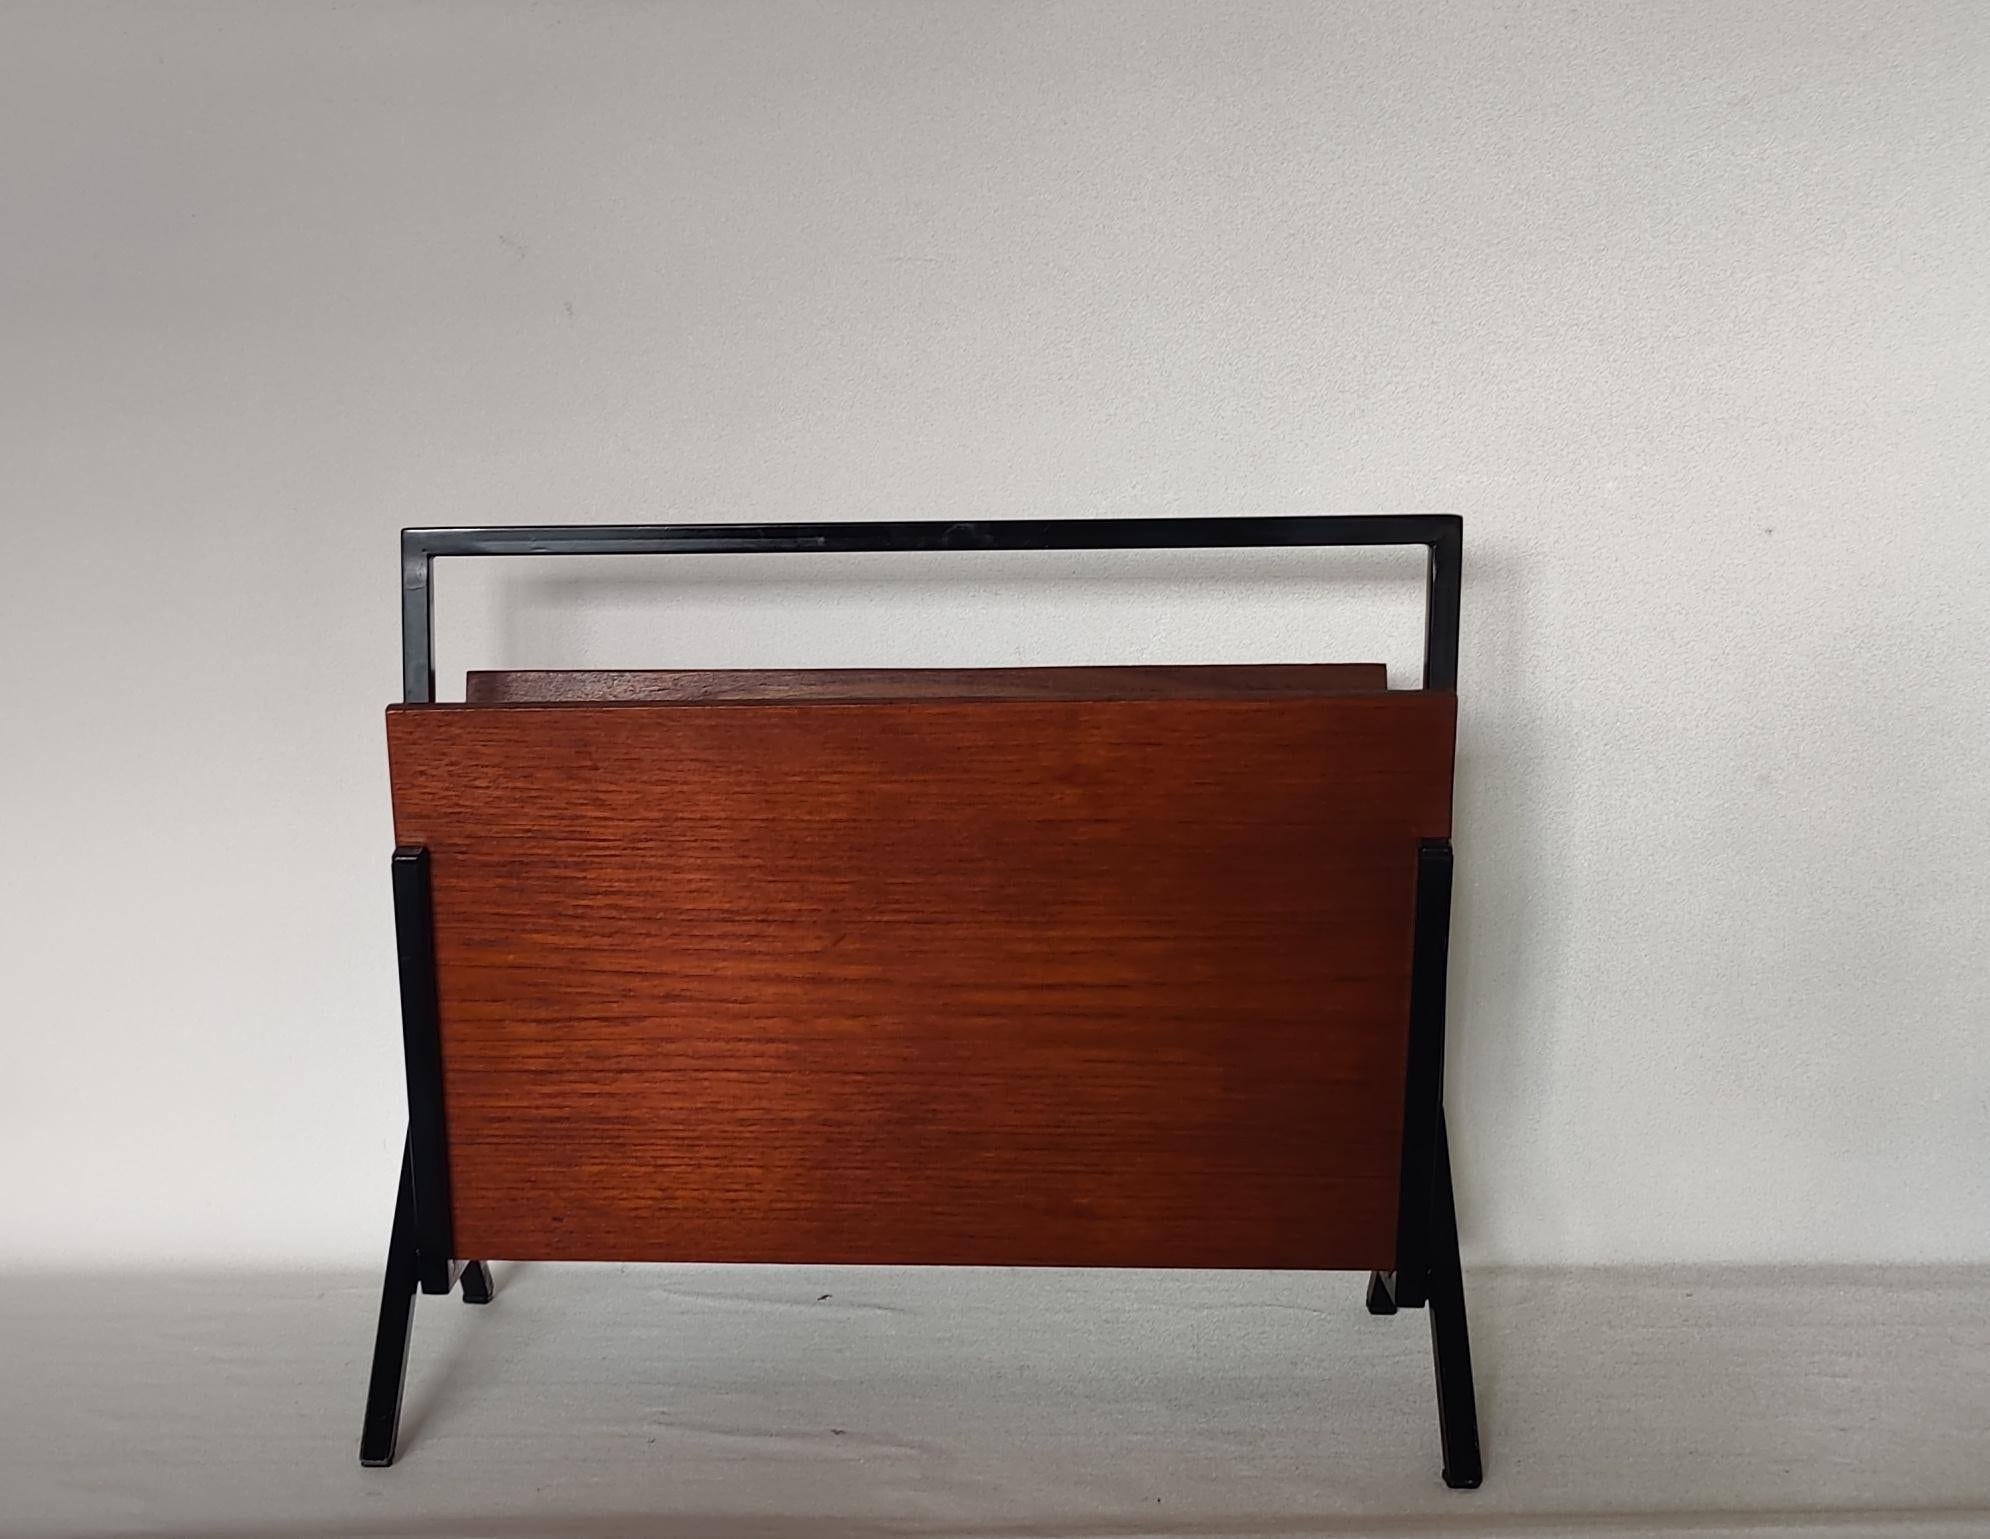 Beautiful minimalistic, sleek design, this dutch magazine stand from the 1960s. Teak veneered and black lacquered metal frame. The dark metal matches with the warm teak veneered wood. In good vintage condition, light signs of wear (see photo's).